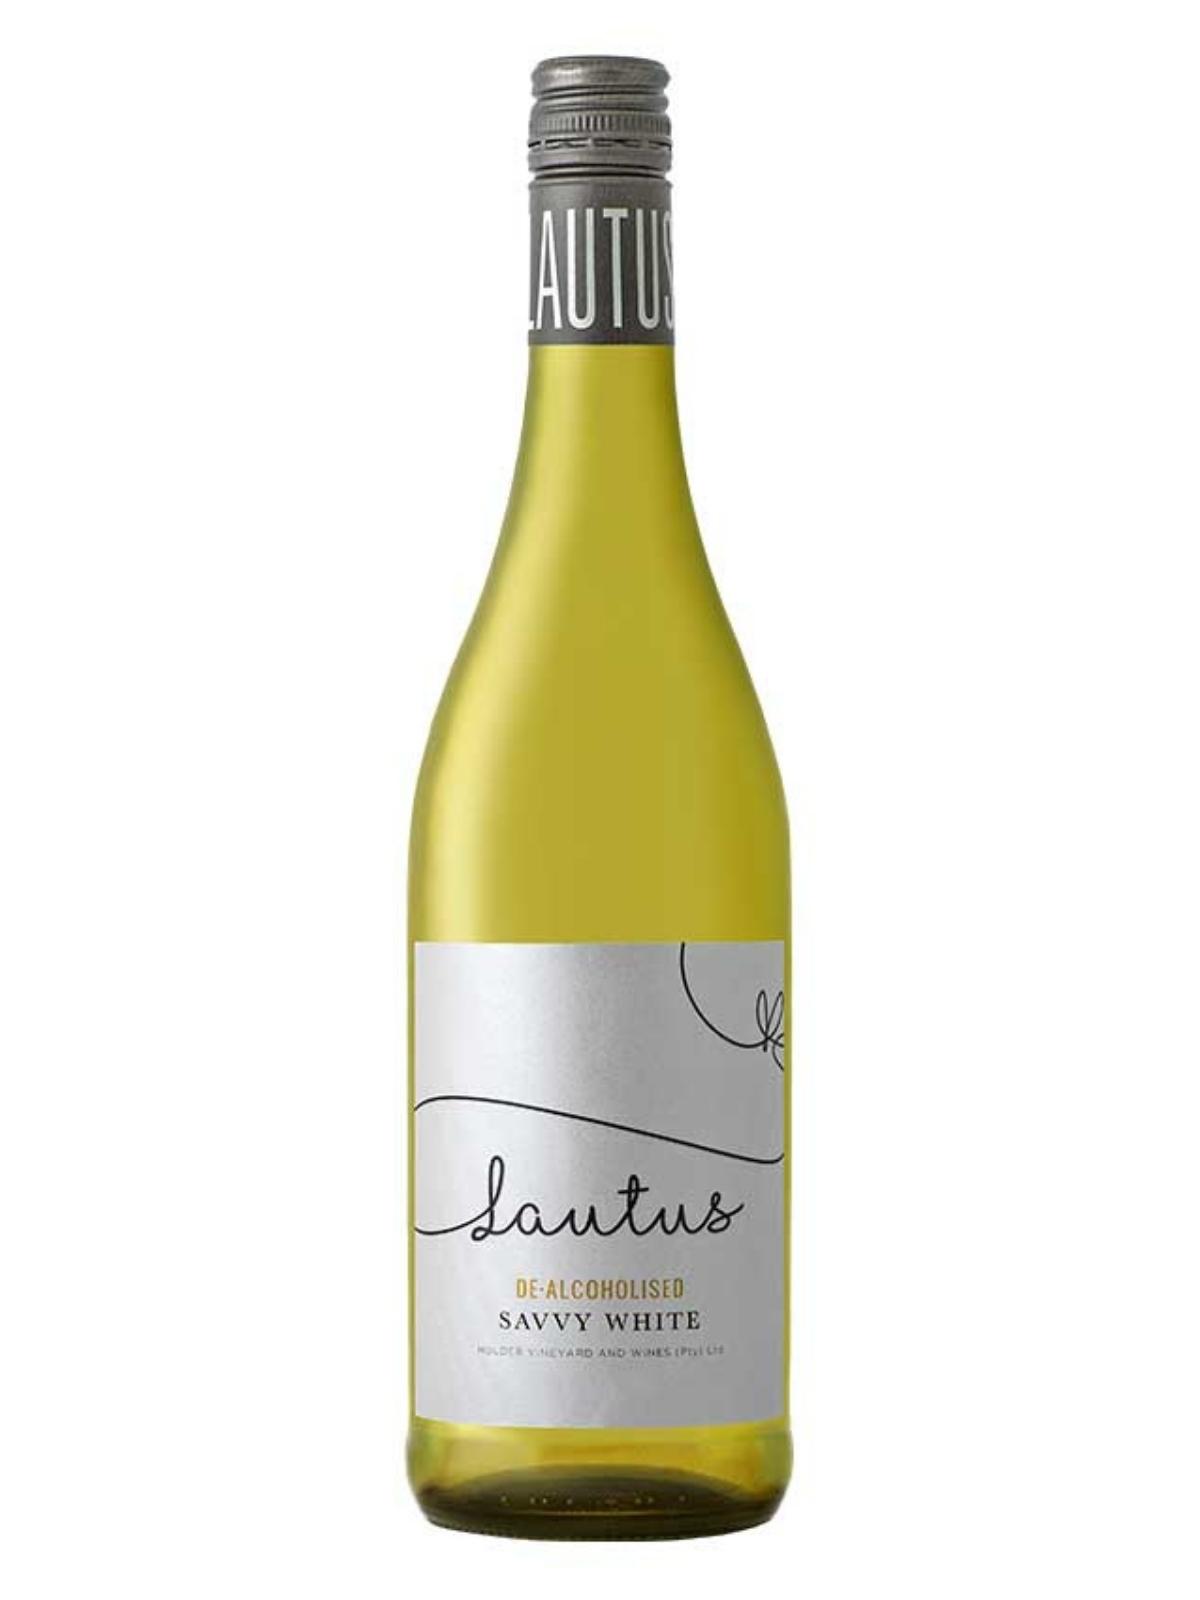 green wine bottle with a white label and the branding Lautus written across the front in gray.